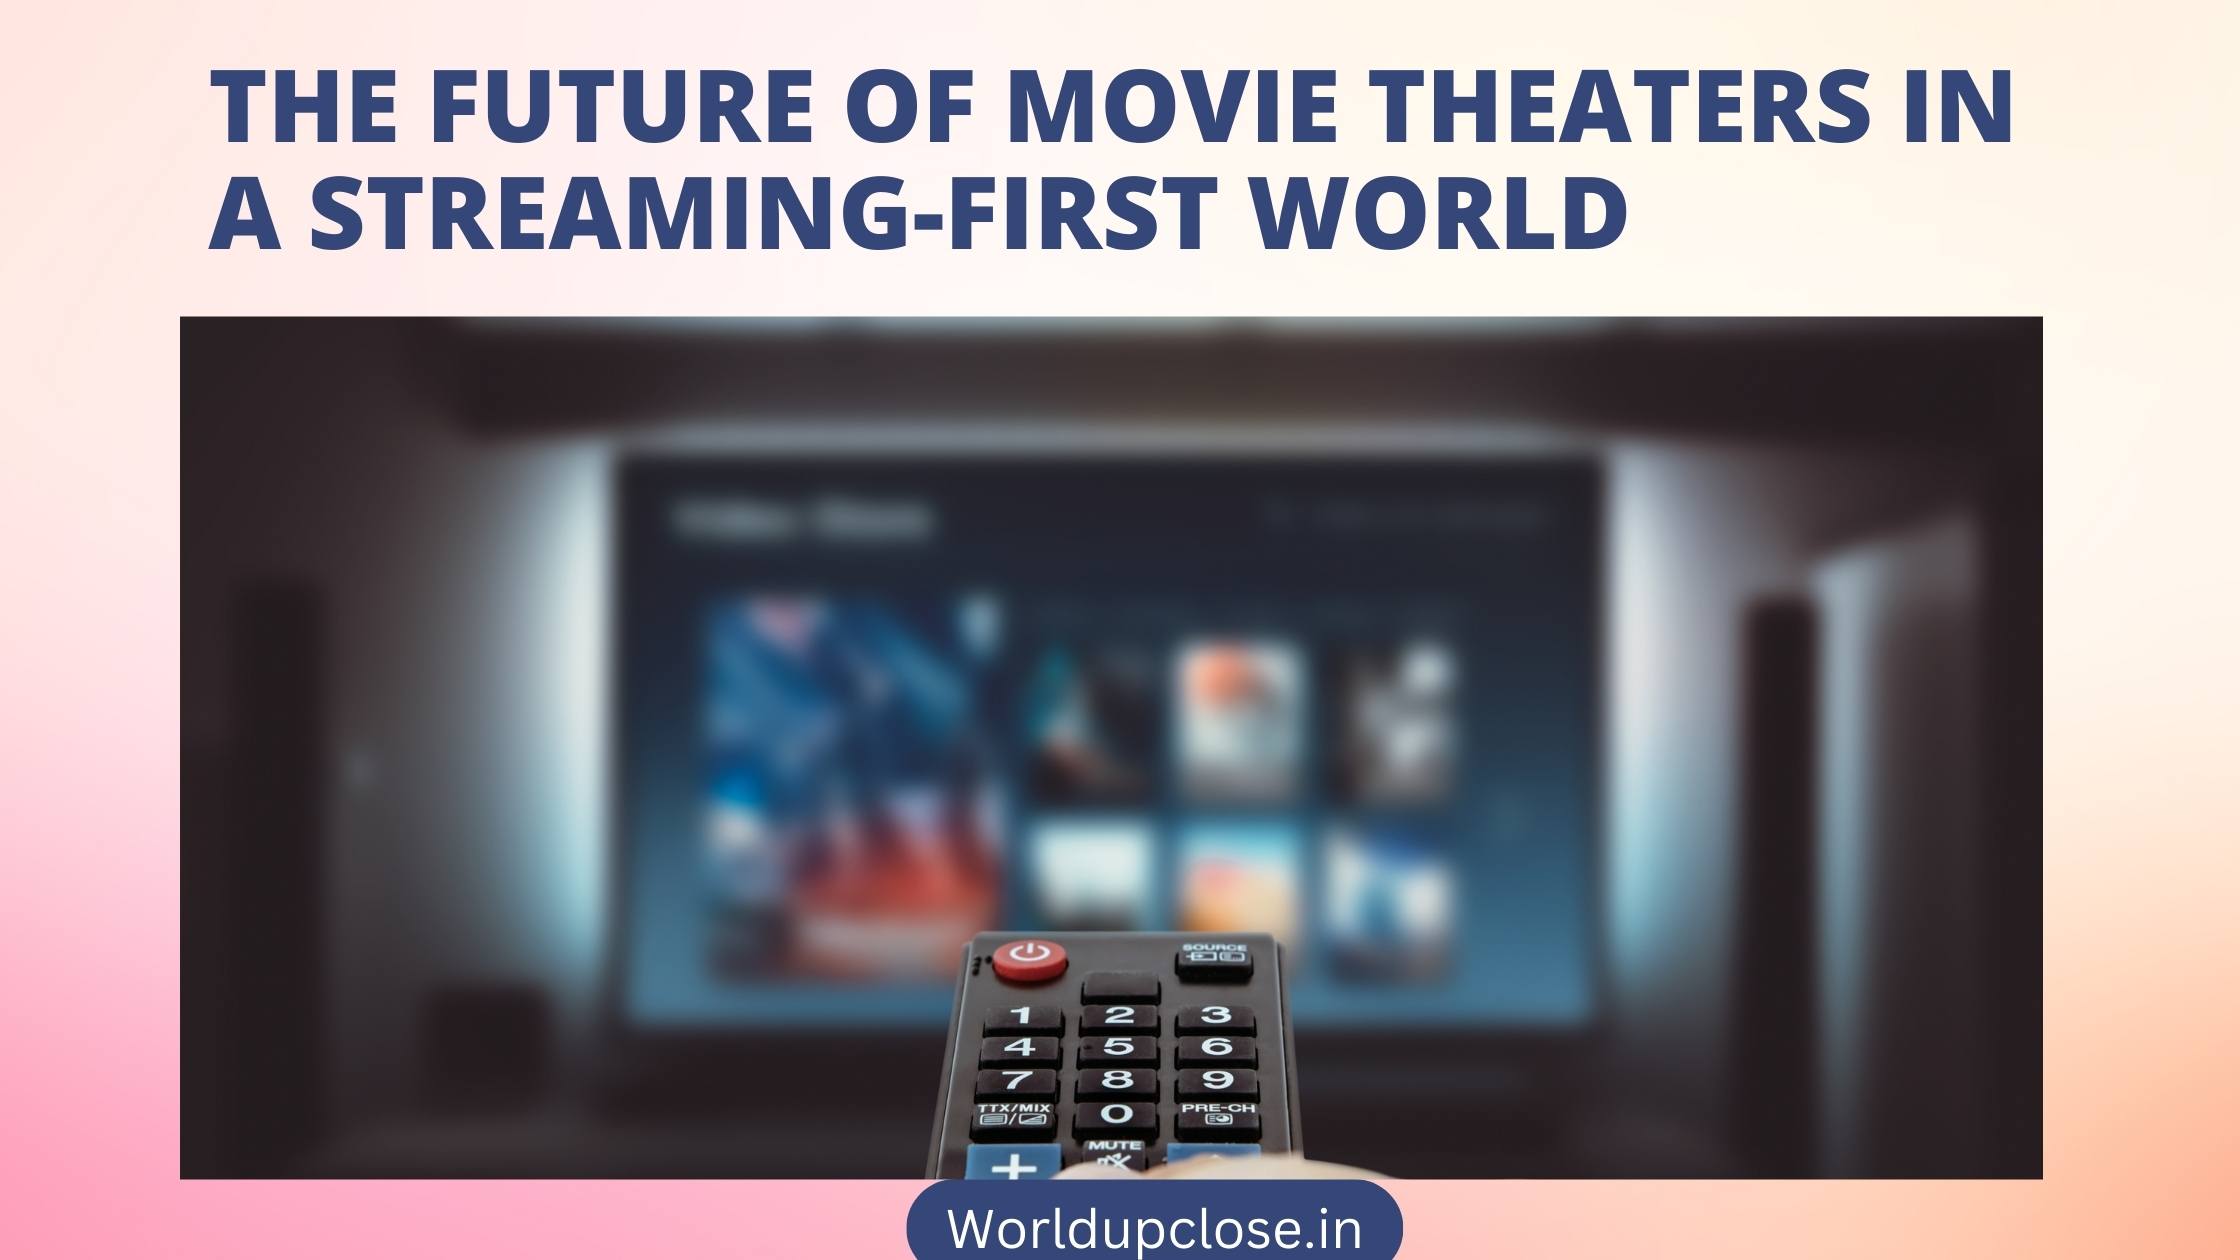 The Future of Movie Theatres in a Streaming-First World 4